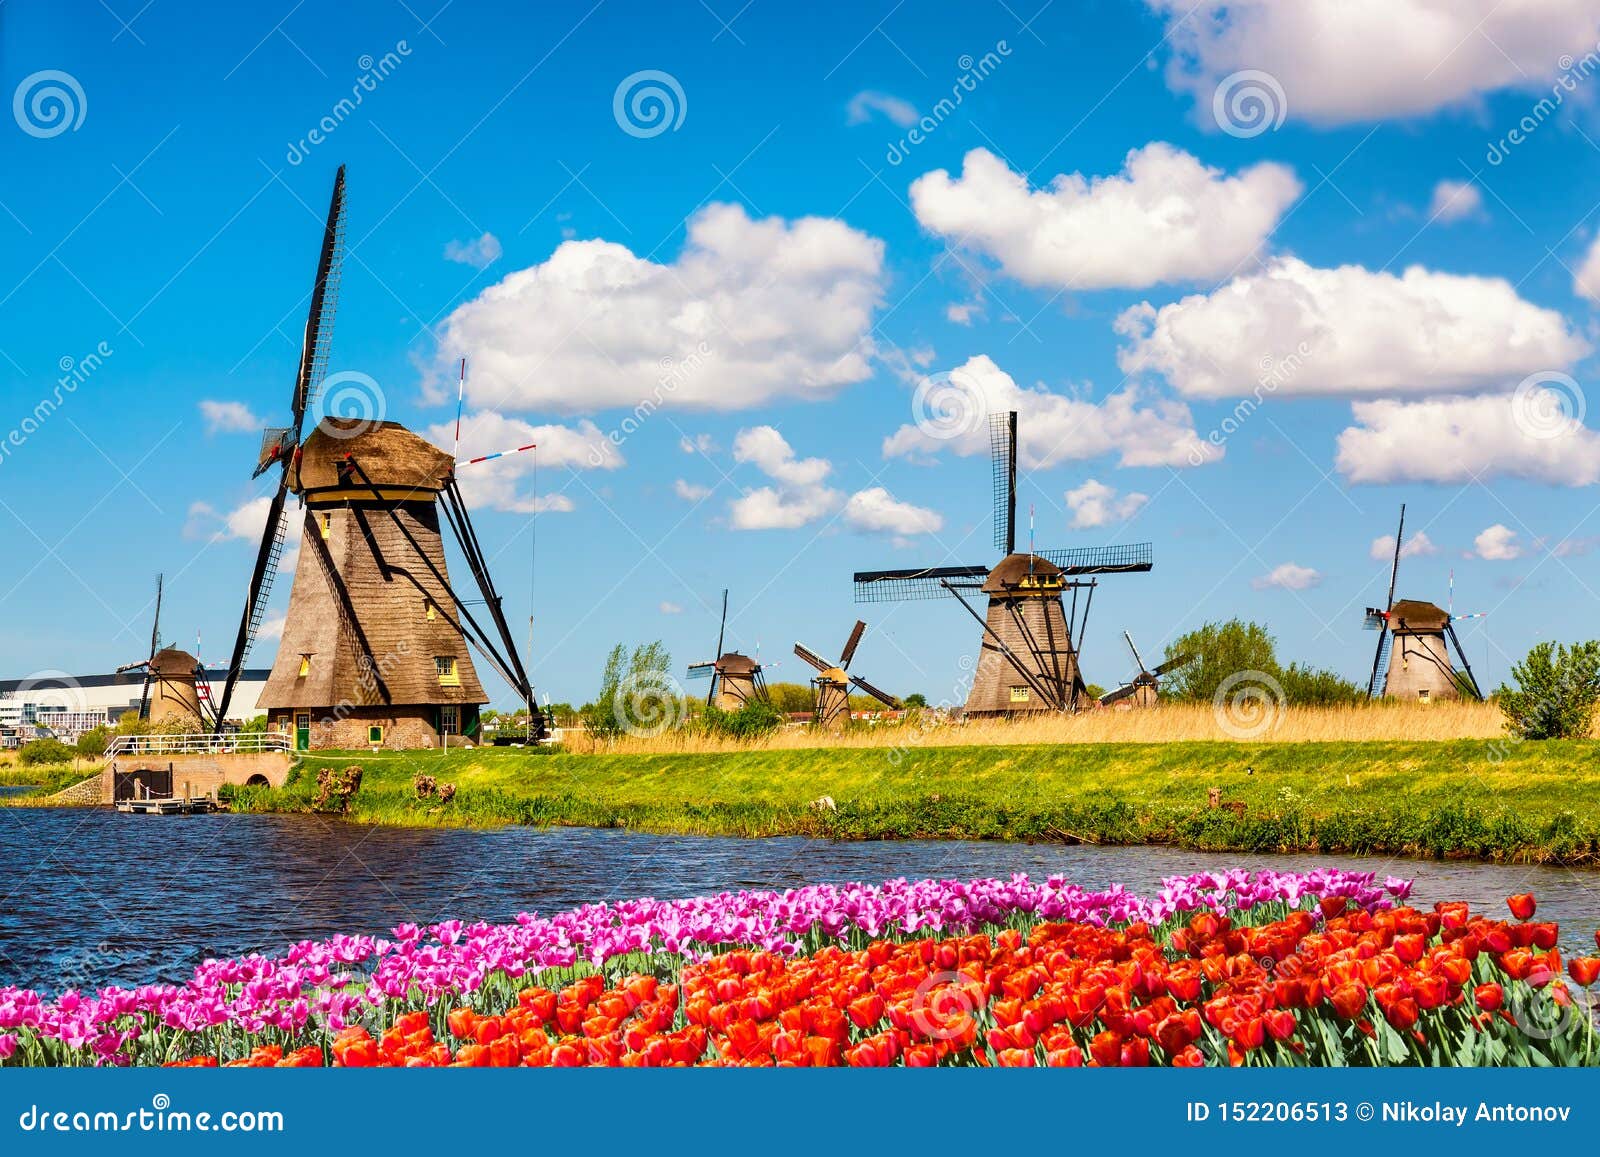 colorful spring landscape in netherlands, europe. famous windmills in kinderdijk village with a tulips flowers flowerbed in